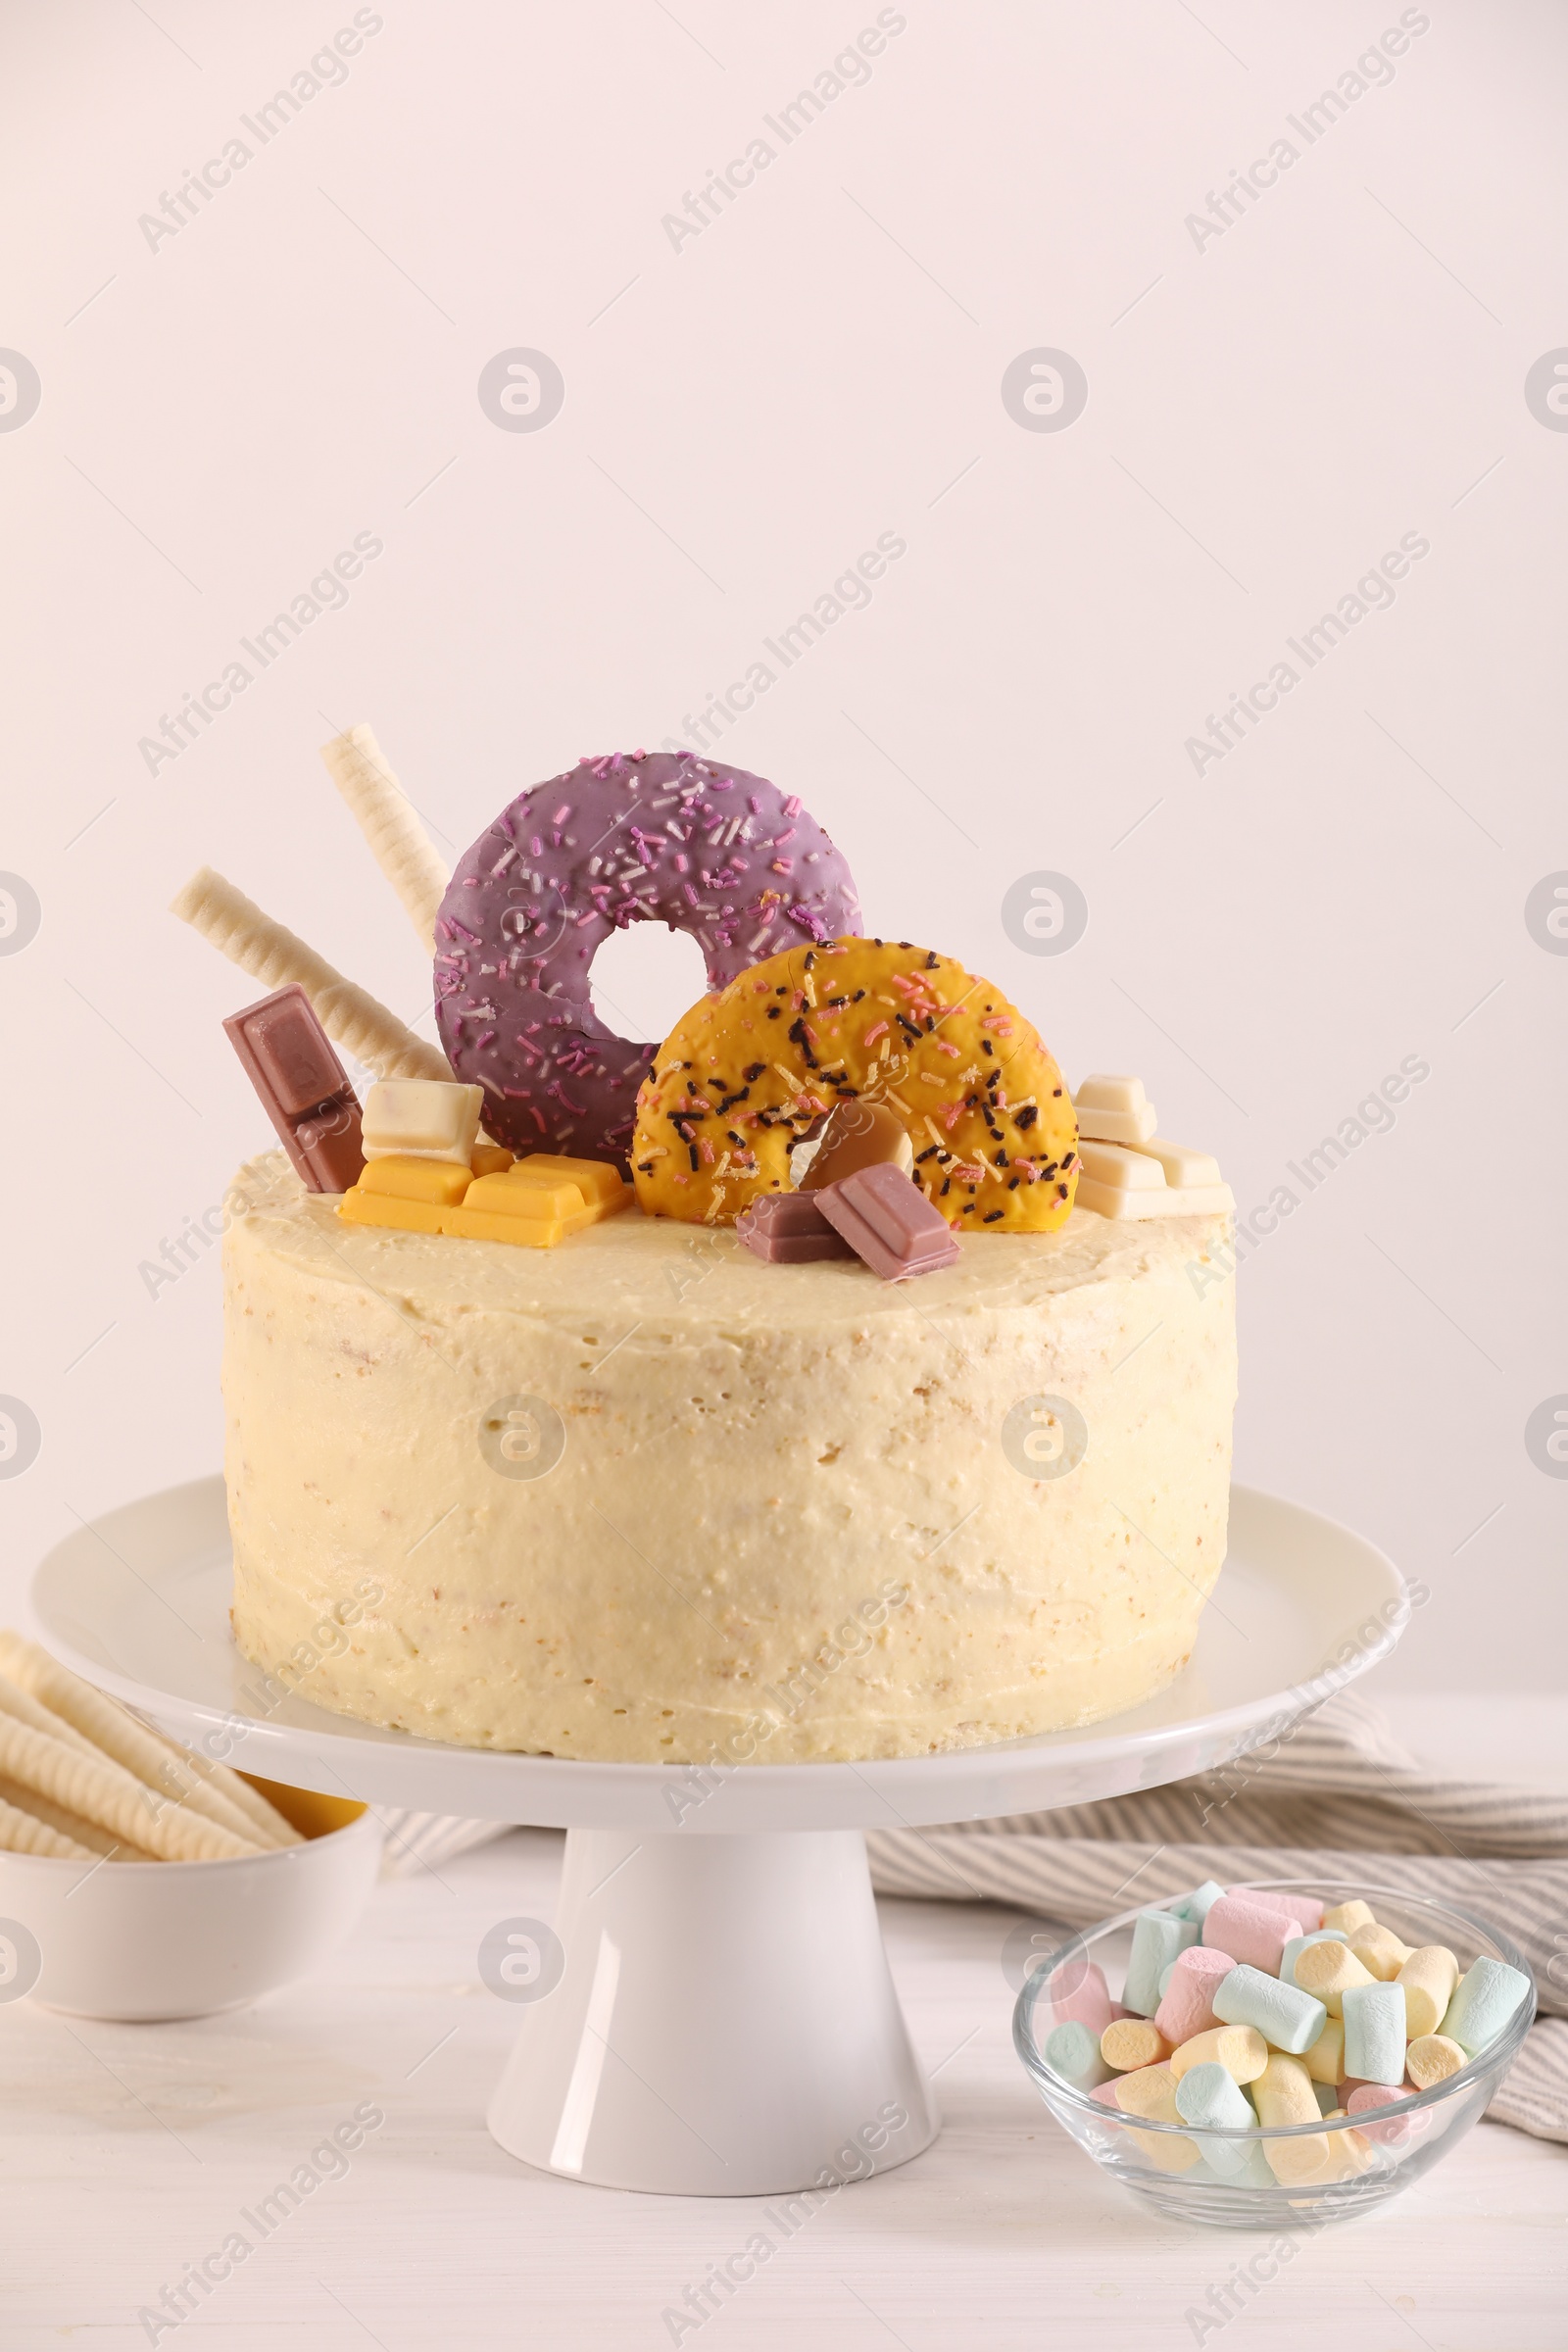 Photo of Delicious cake decorated with sweets and marshmallows on white wooden table